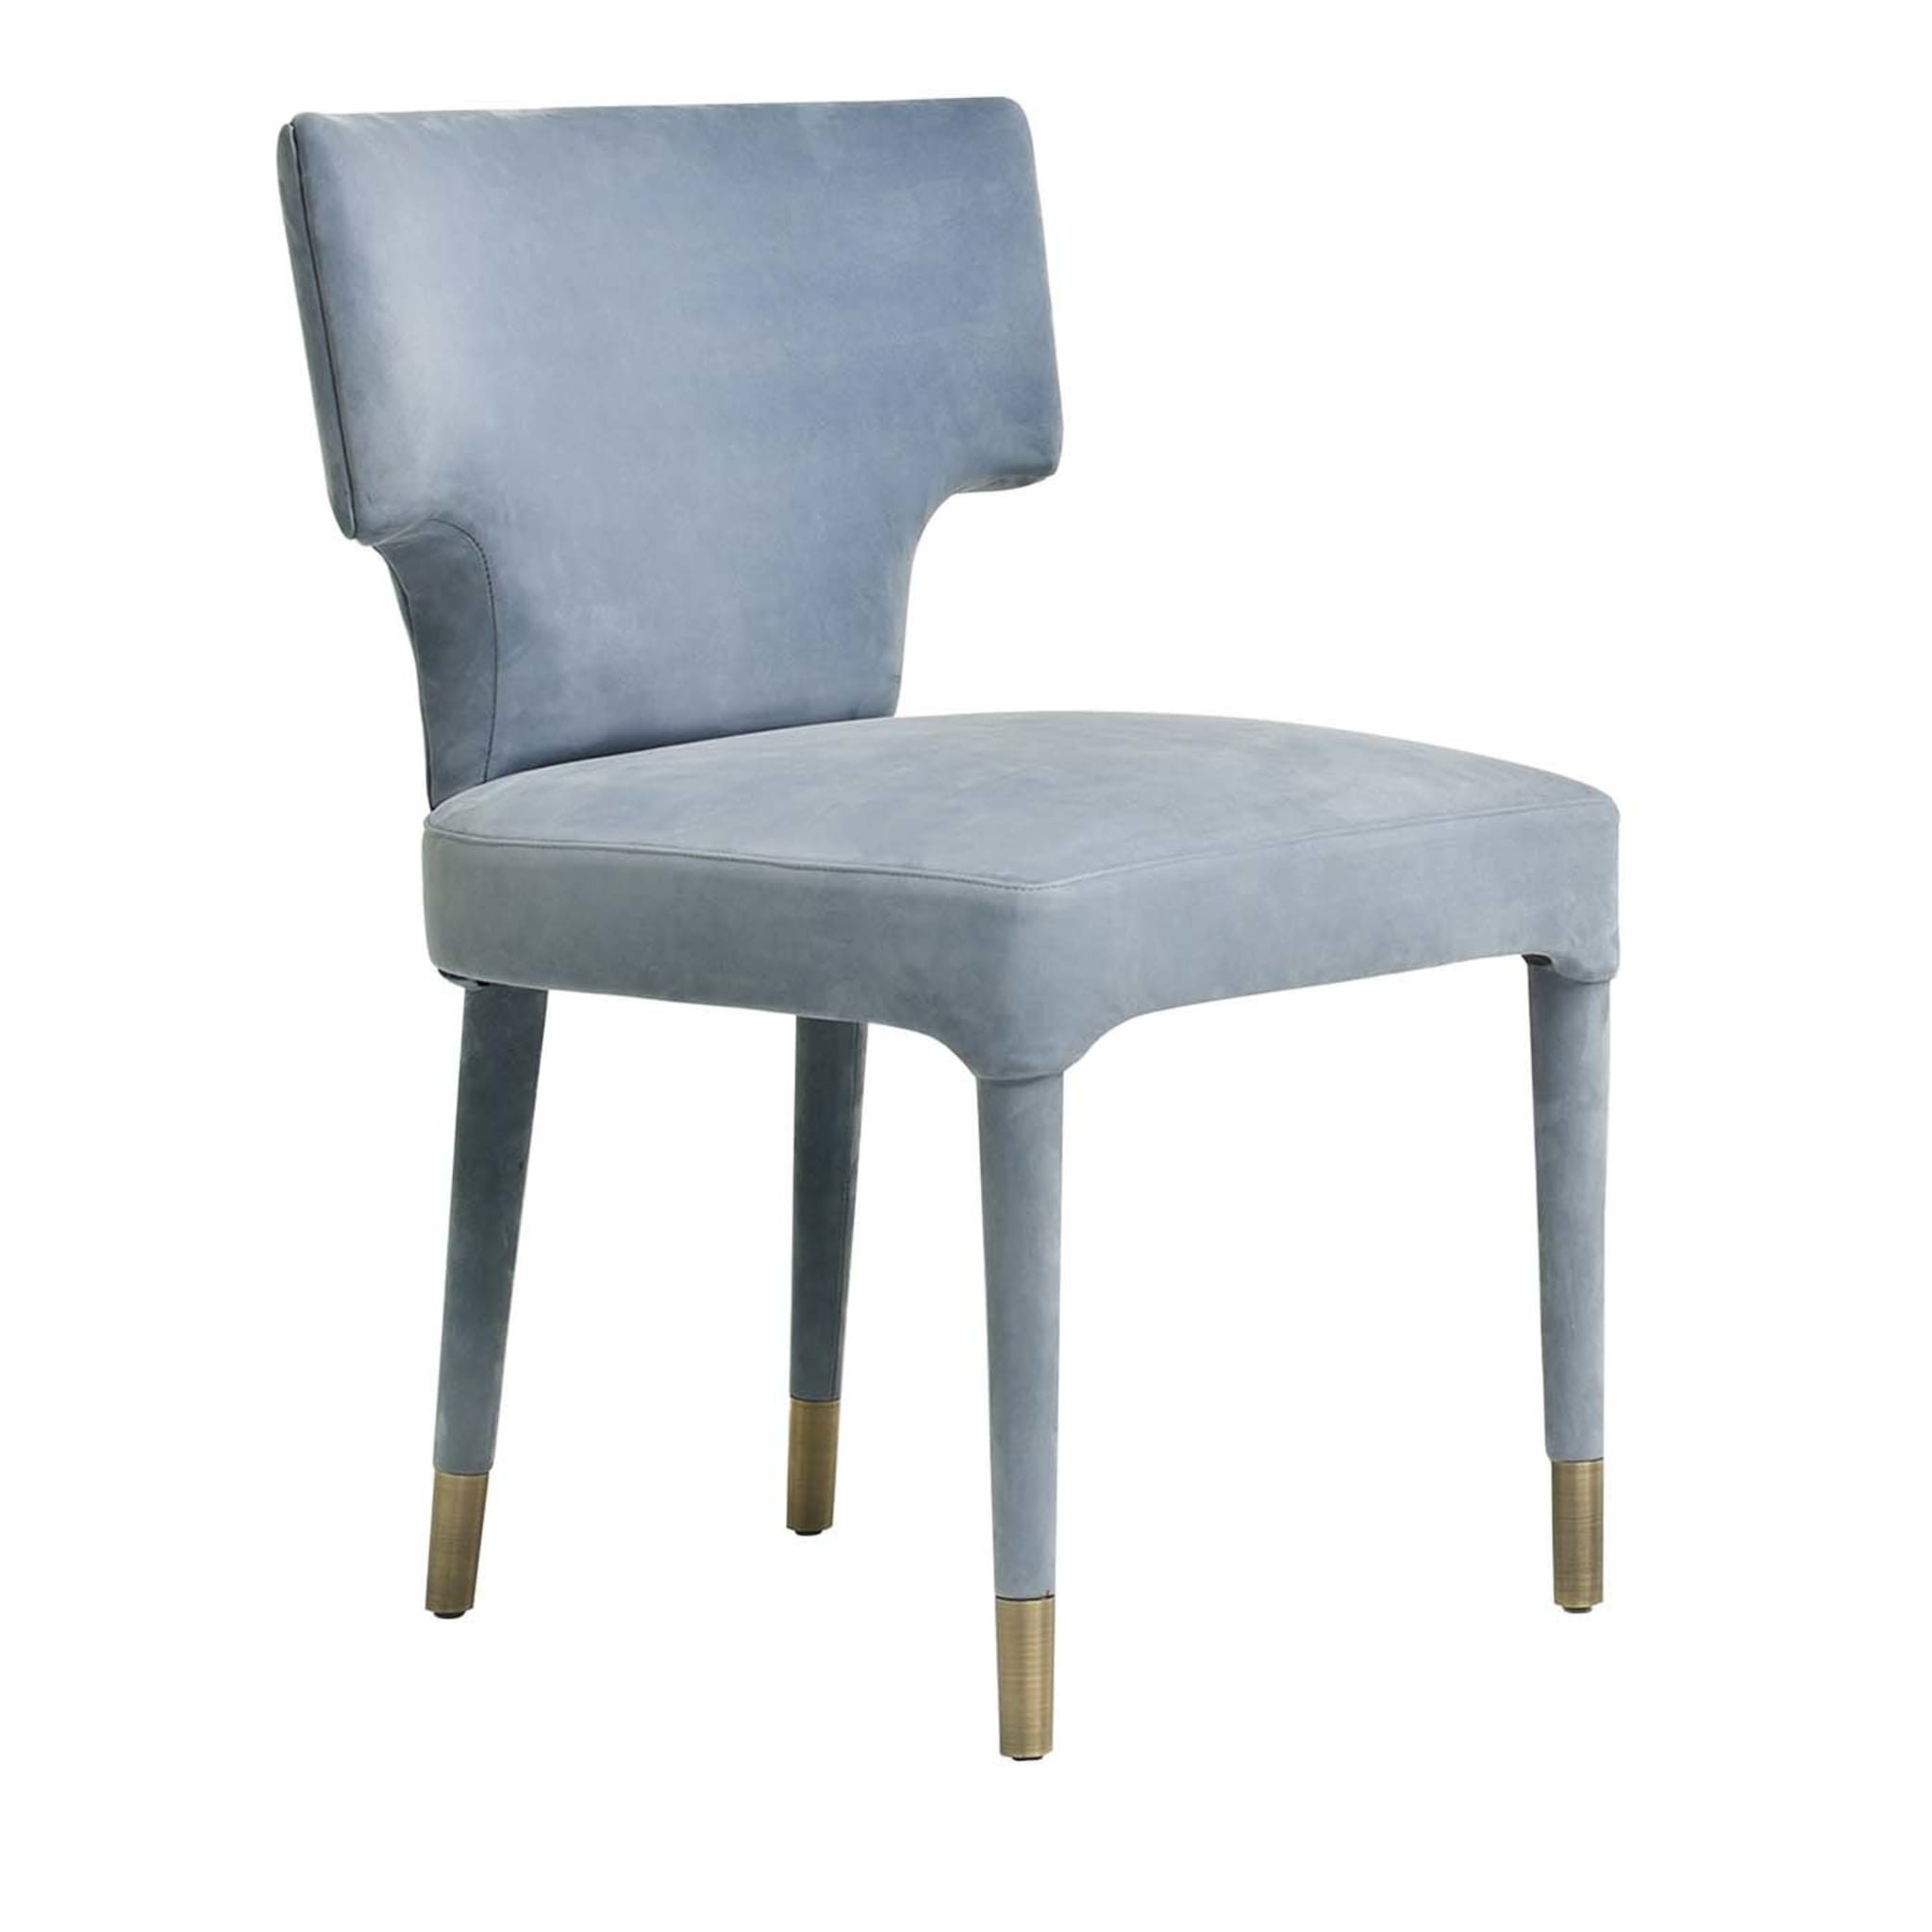 Martinica Dining Chair by Dainelli Studio - Main view